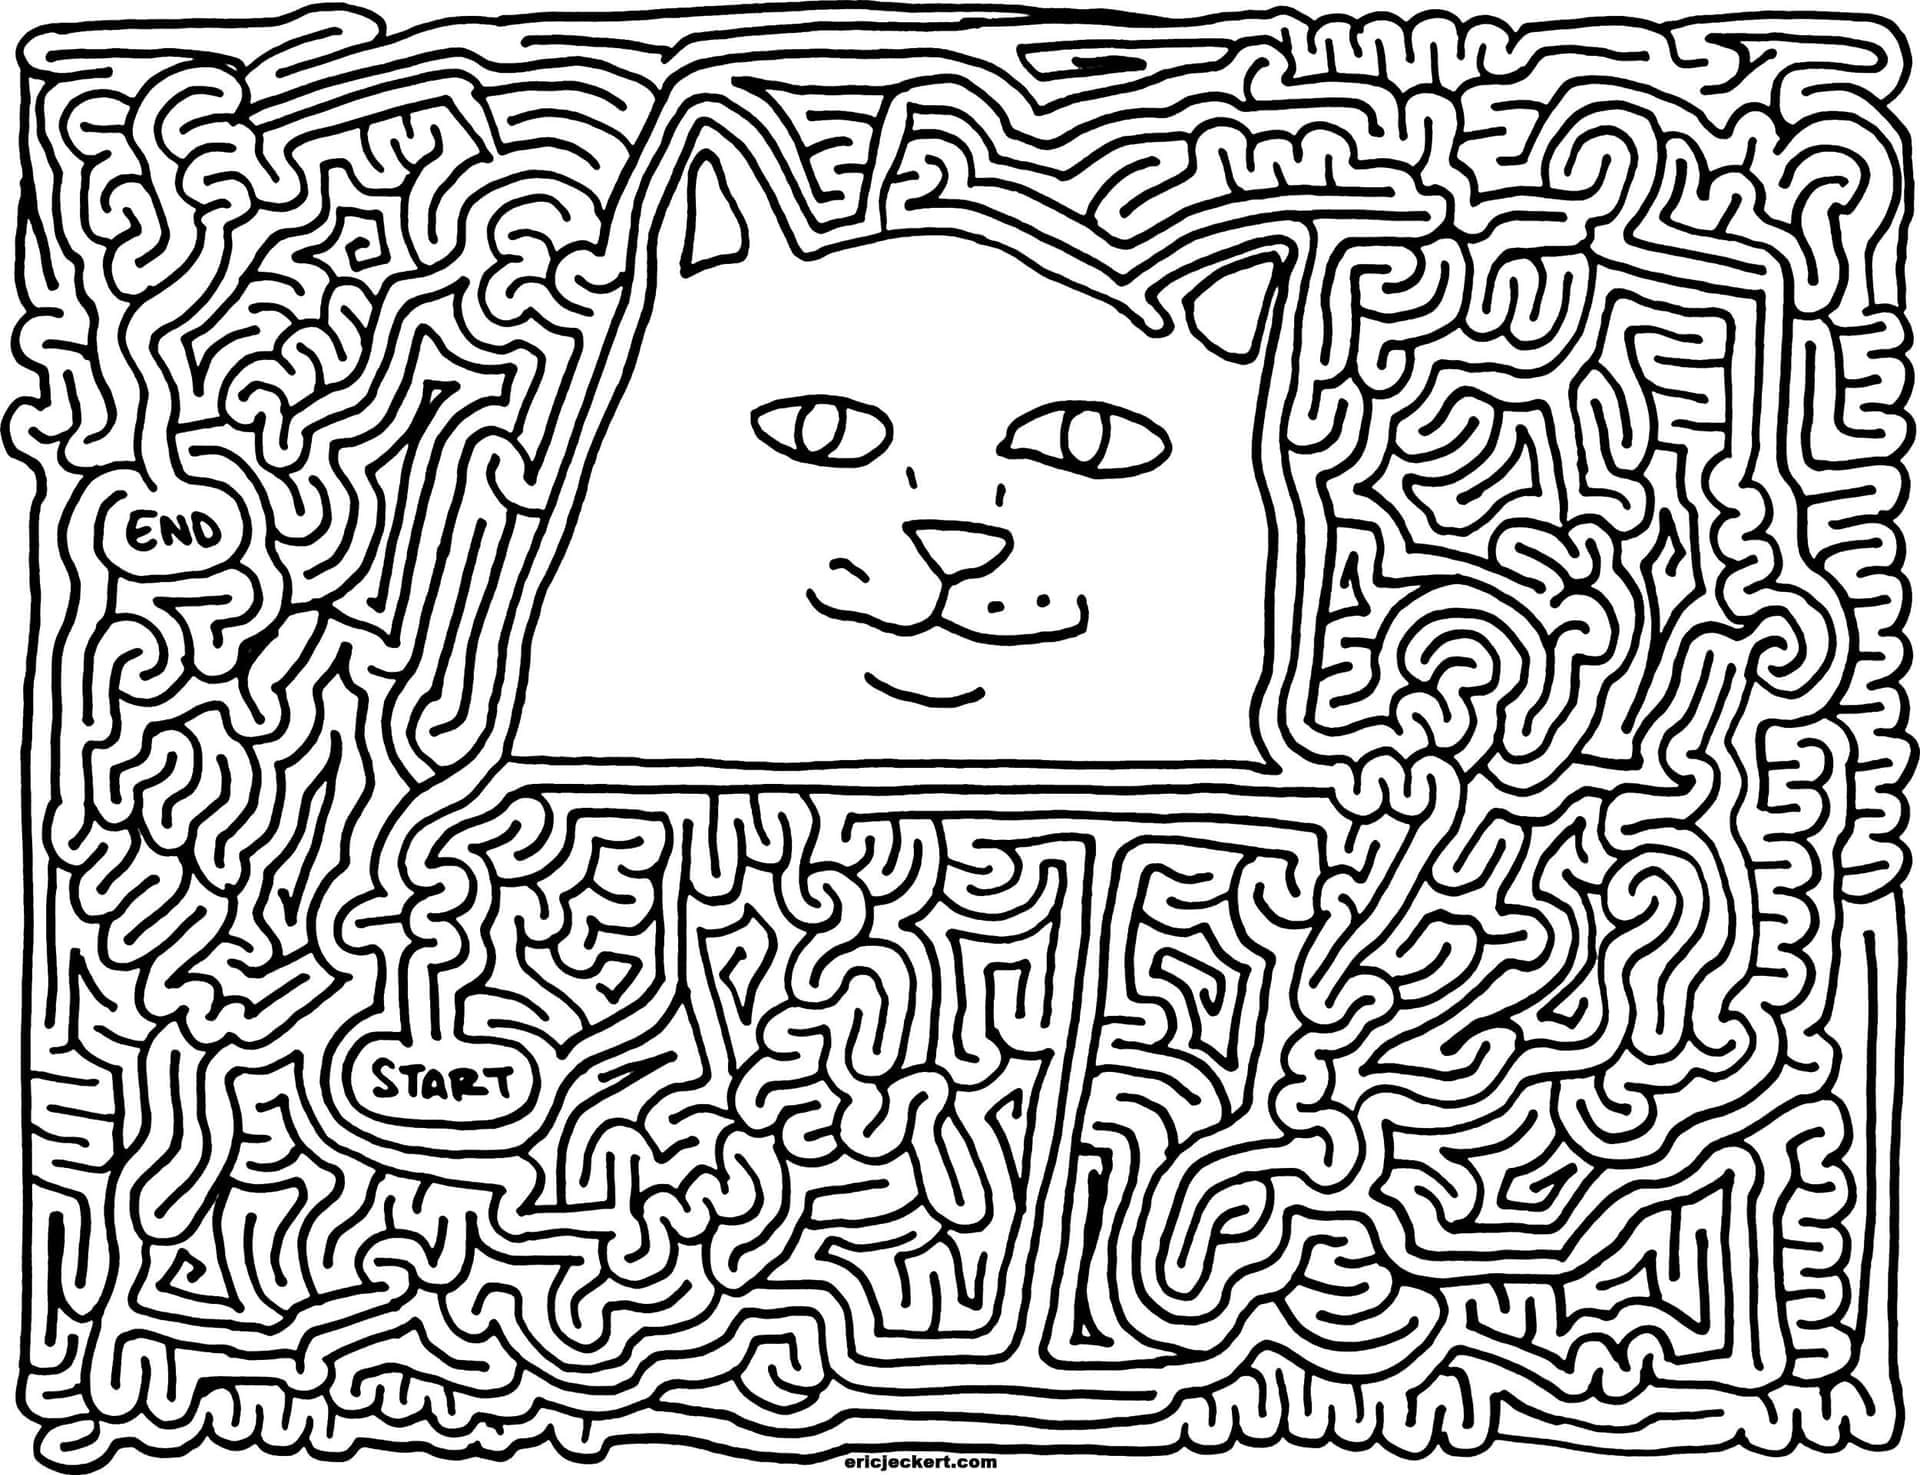 A Cat In A Maze With A Maze